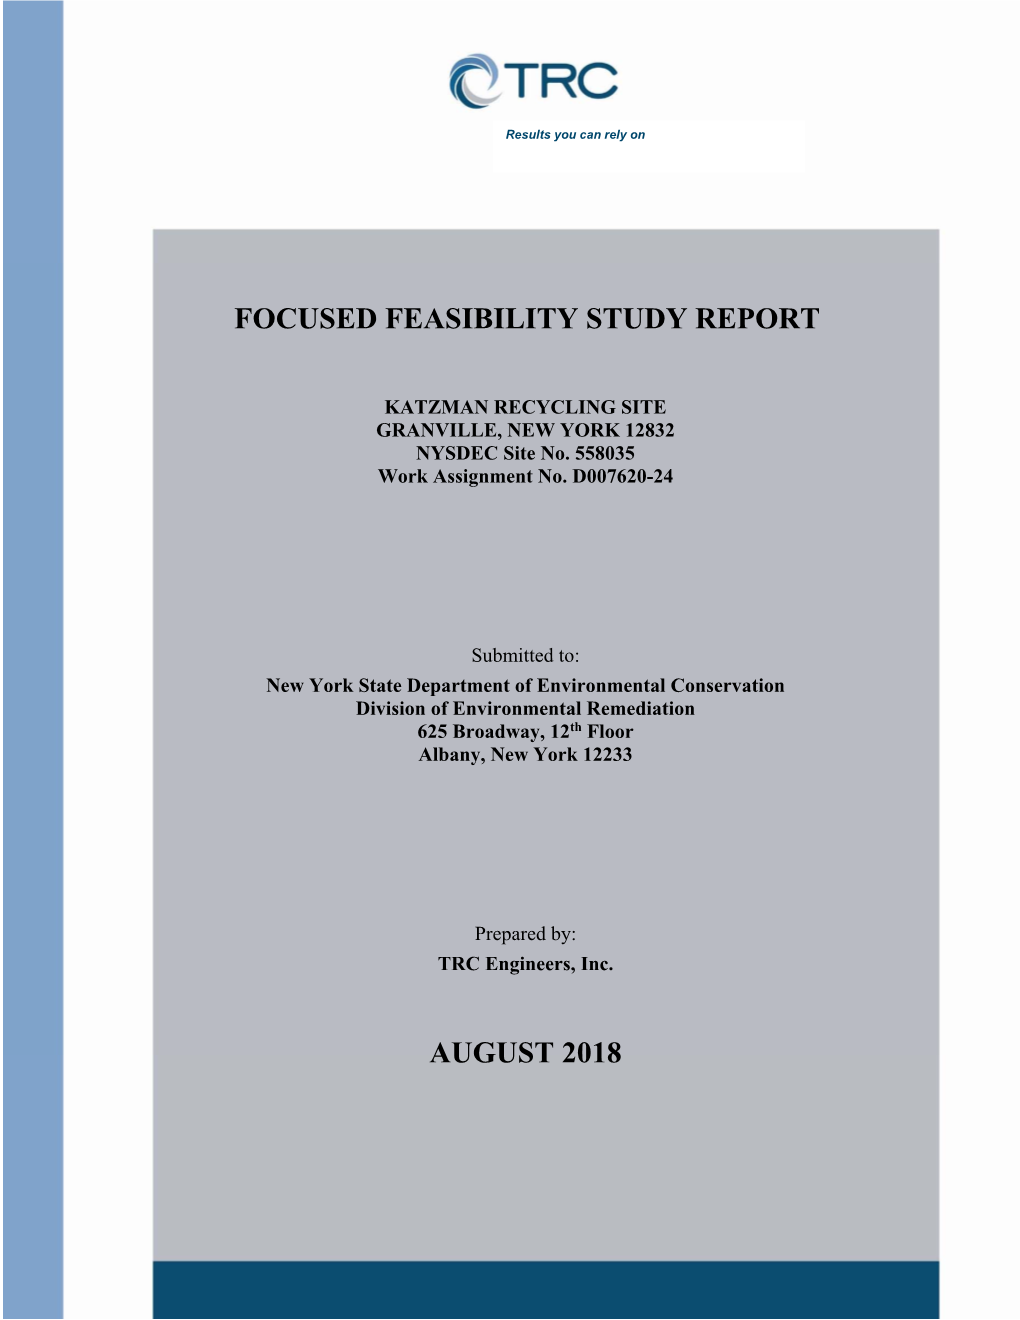 Focused Feasibility Study Report August 2018